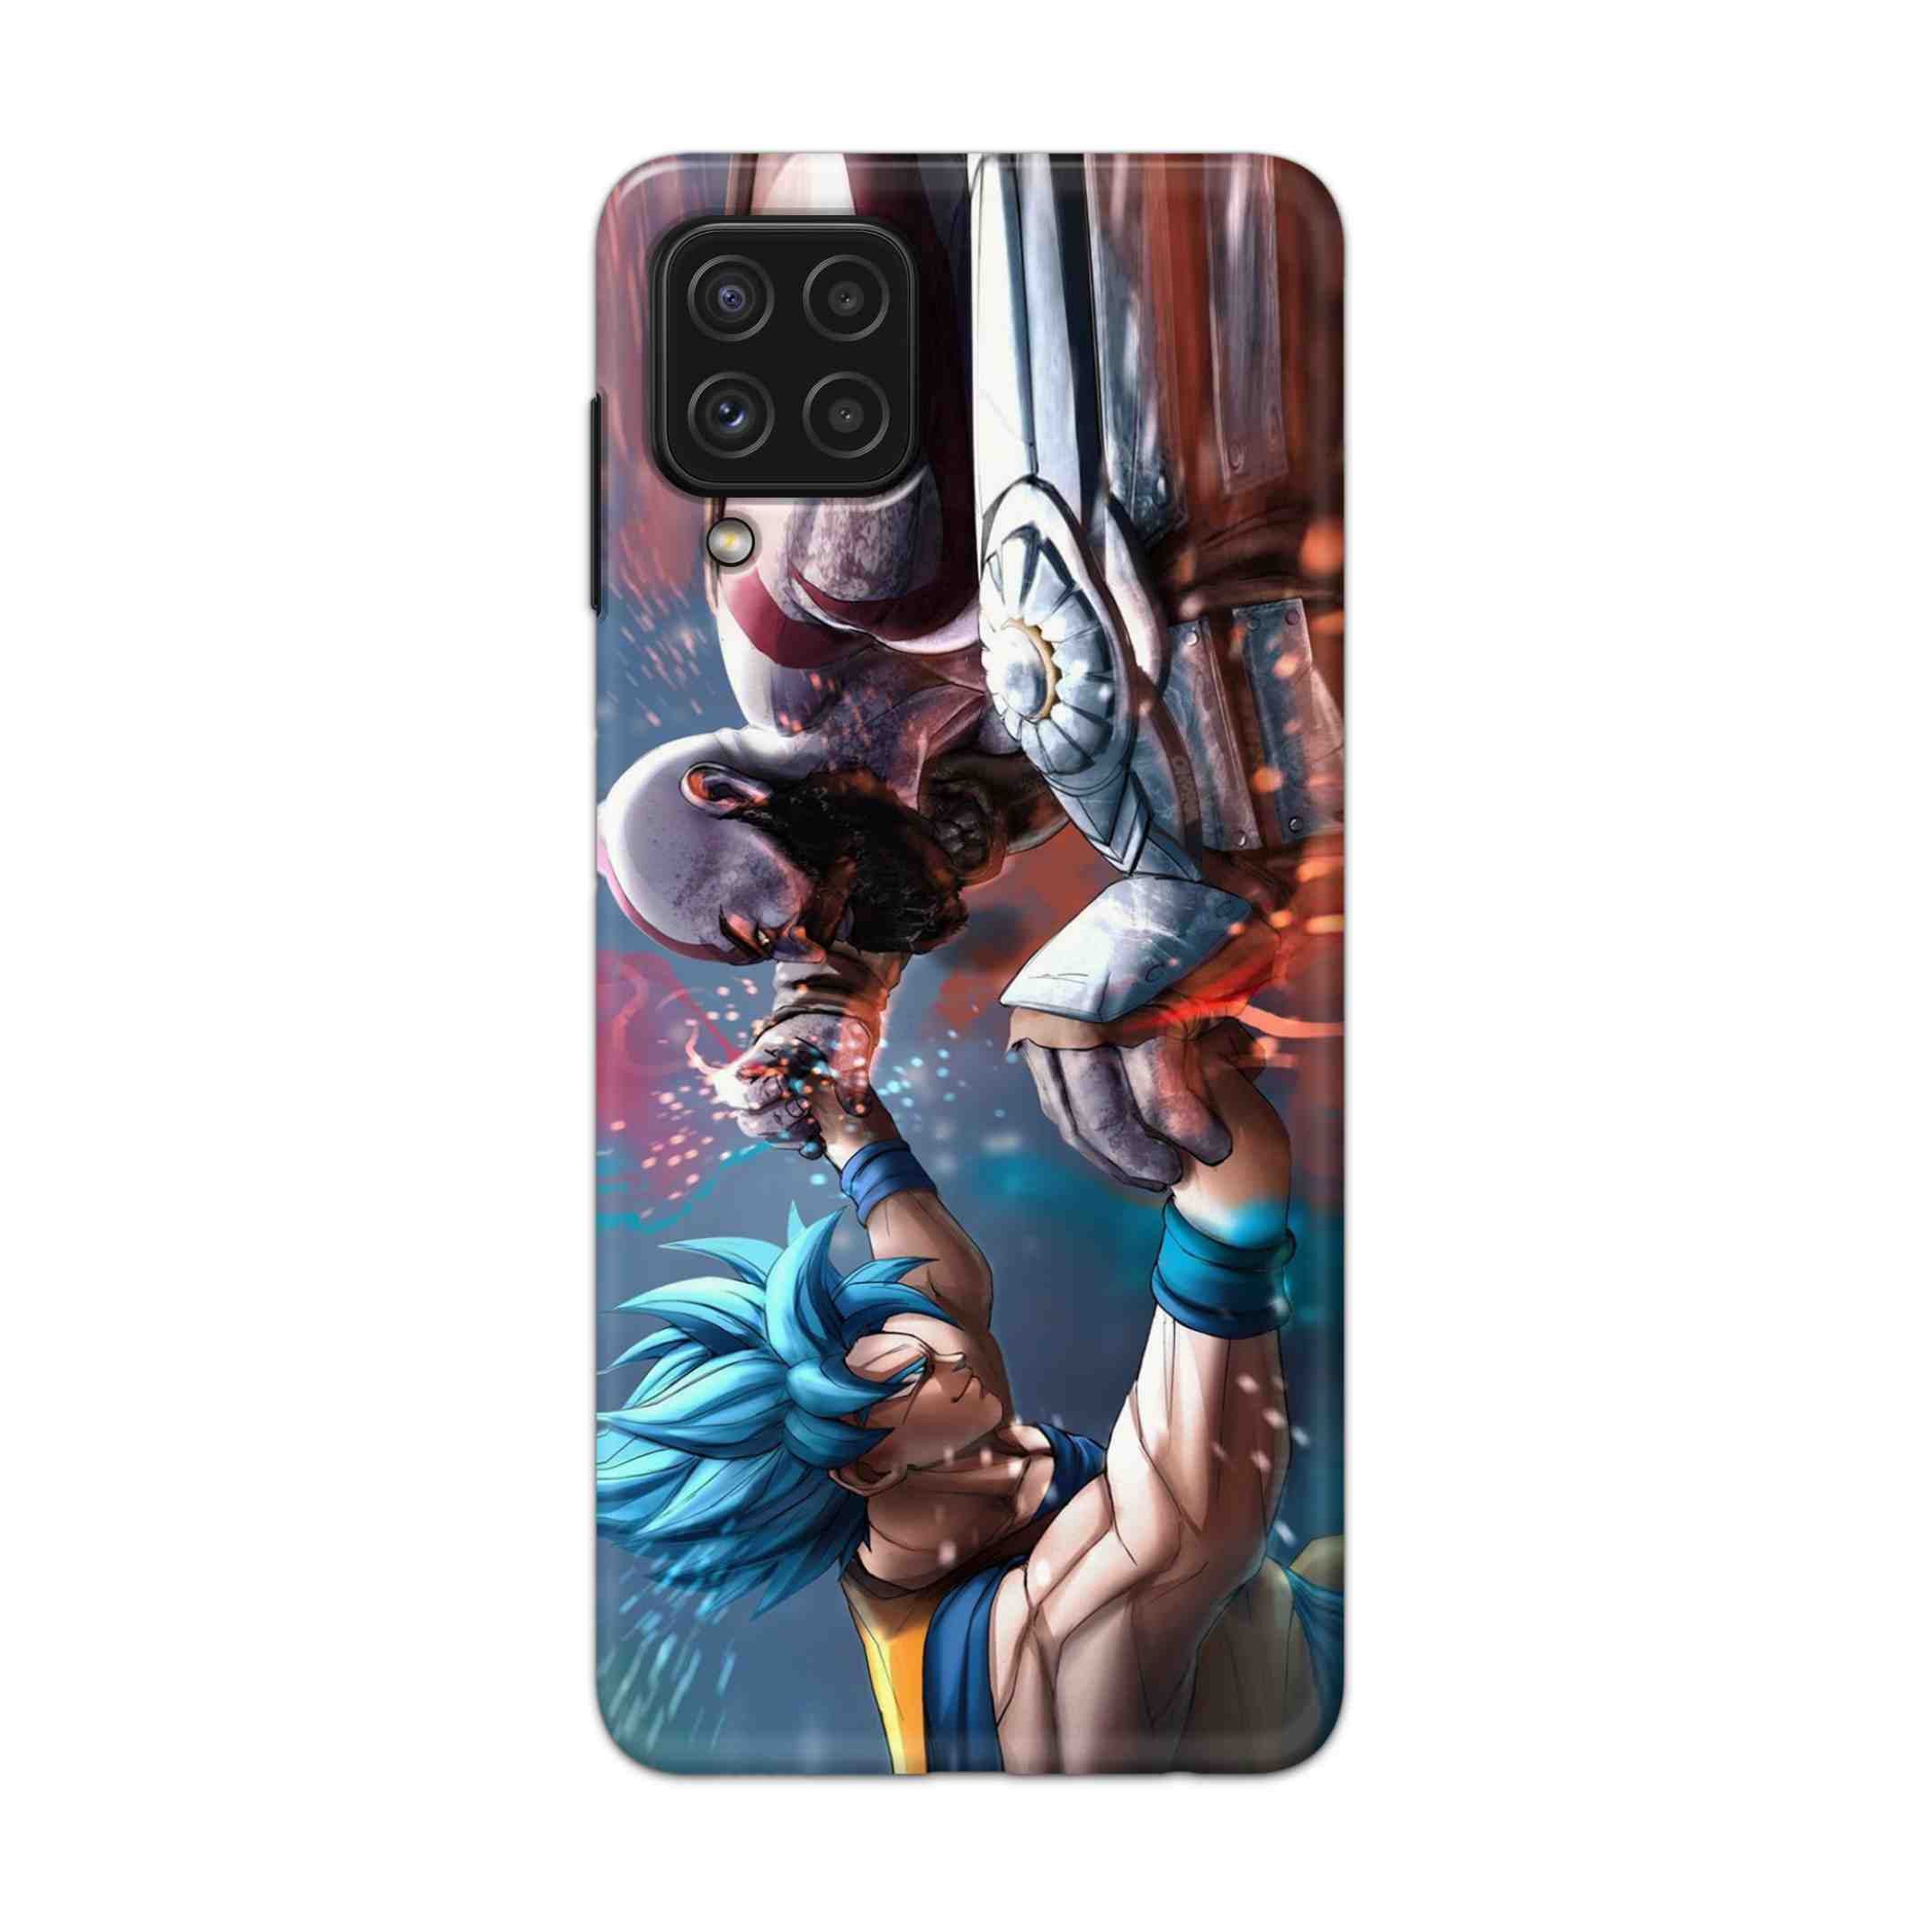 Buy Goku Vs Kratos Hard Back Mobile Phone Case Cover For Samsung Galaxy A22 Online